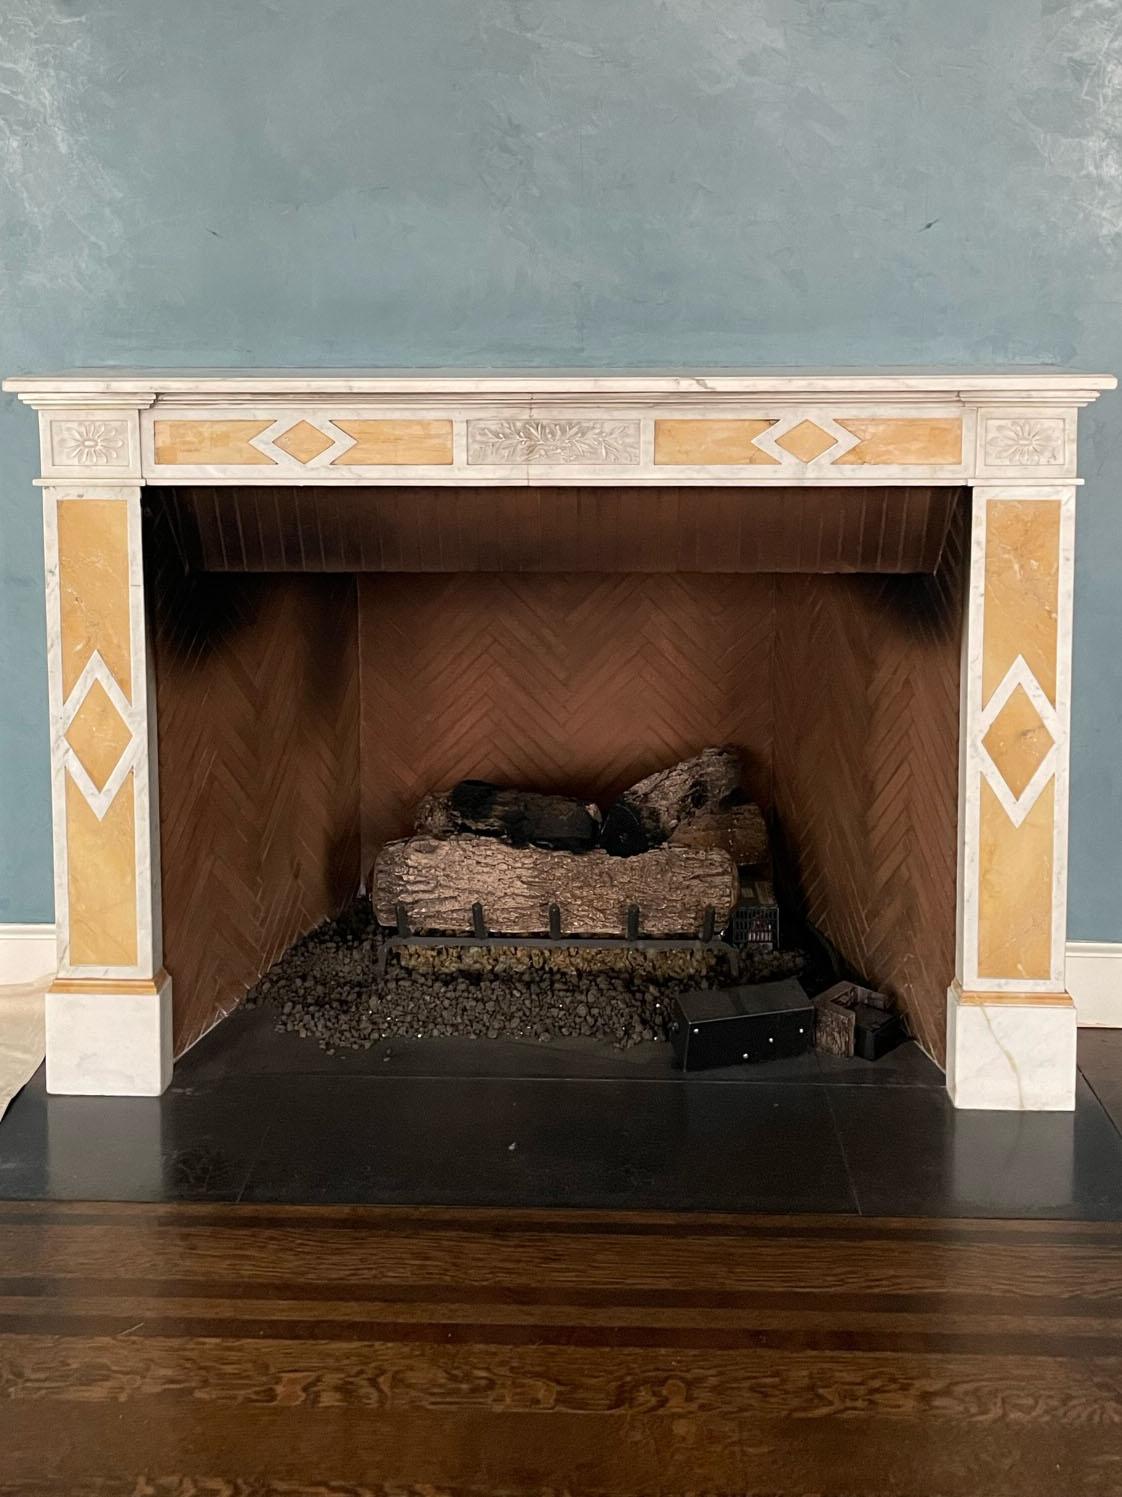 A late 19th century Belgian mantelpiece in Carrara marble with Giallo Siena inlay.
 